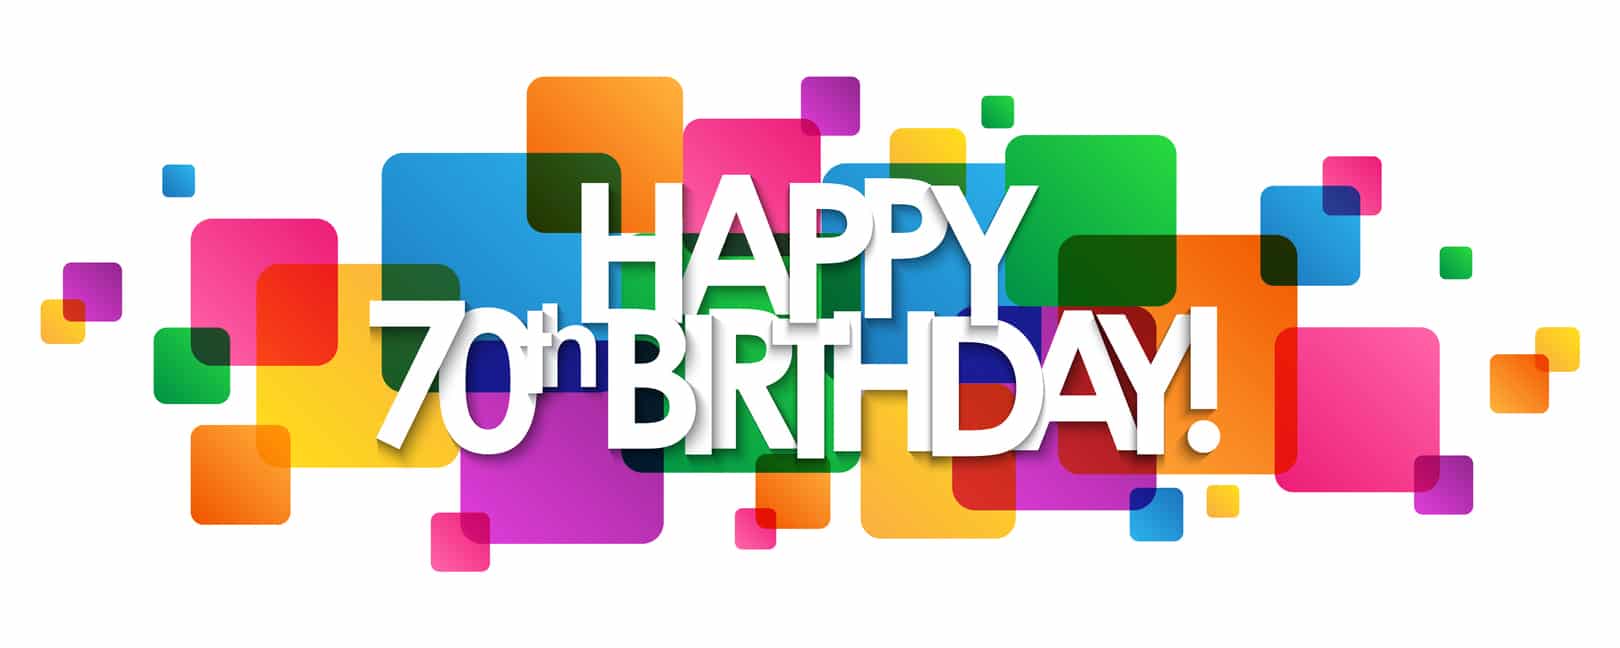 HAPPY 70th BIRTHDAY! colorful typography banner › American Institute of Building Design (AIBD)